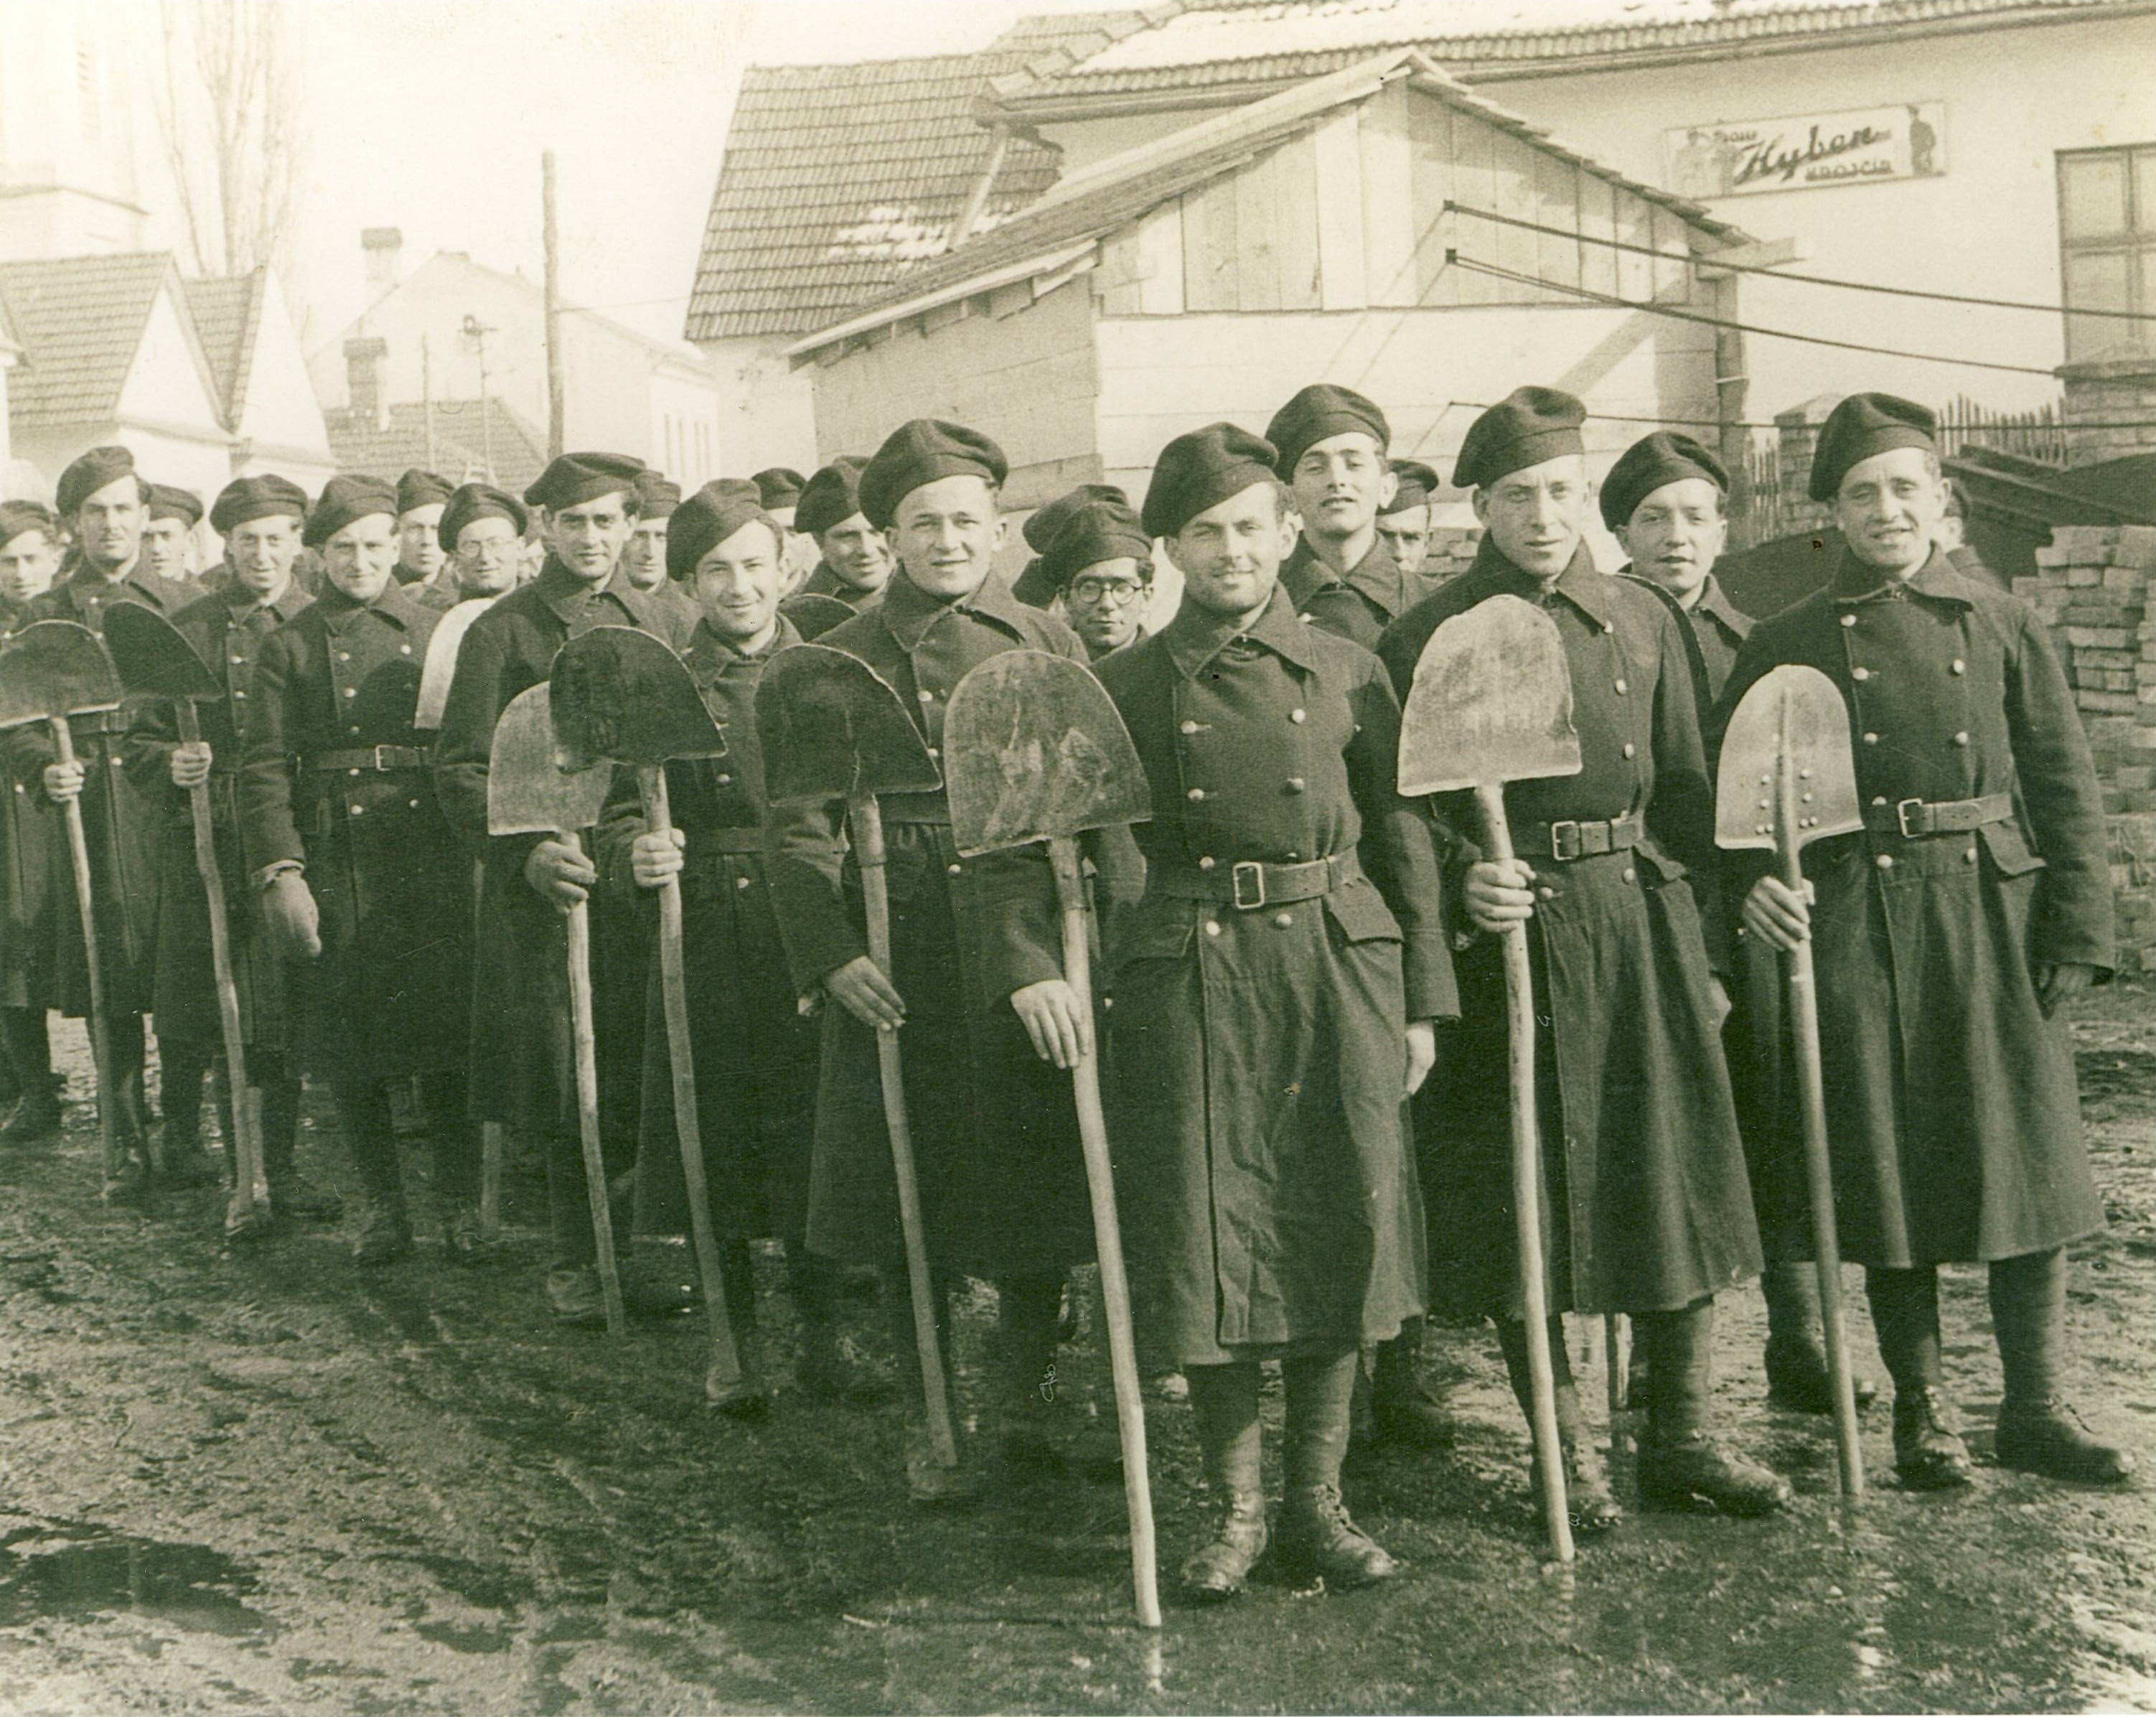 Work Brigade 1941 in Hummene posing with upright shovels